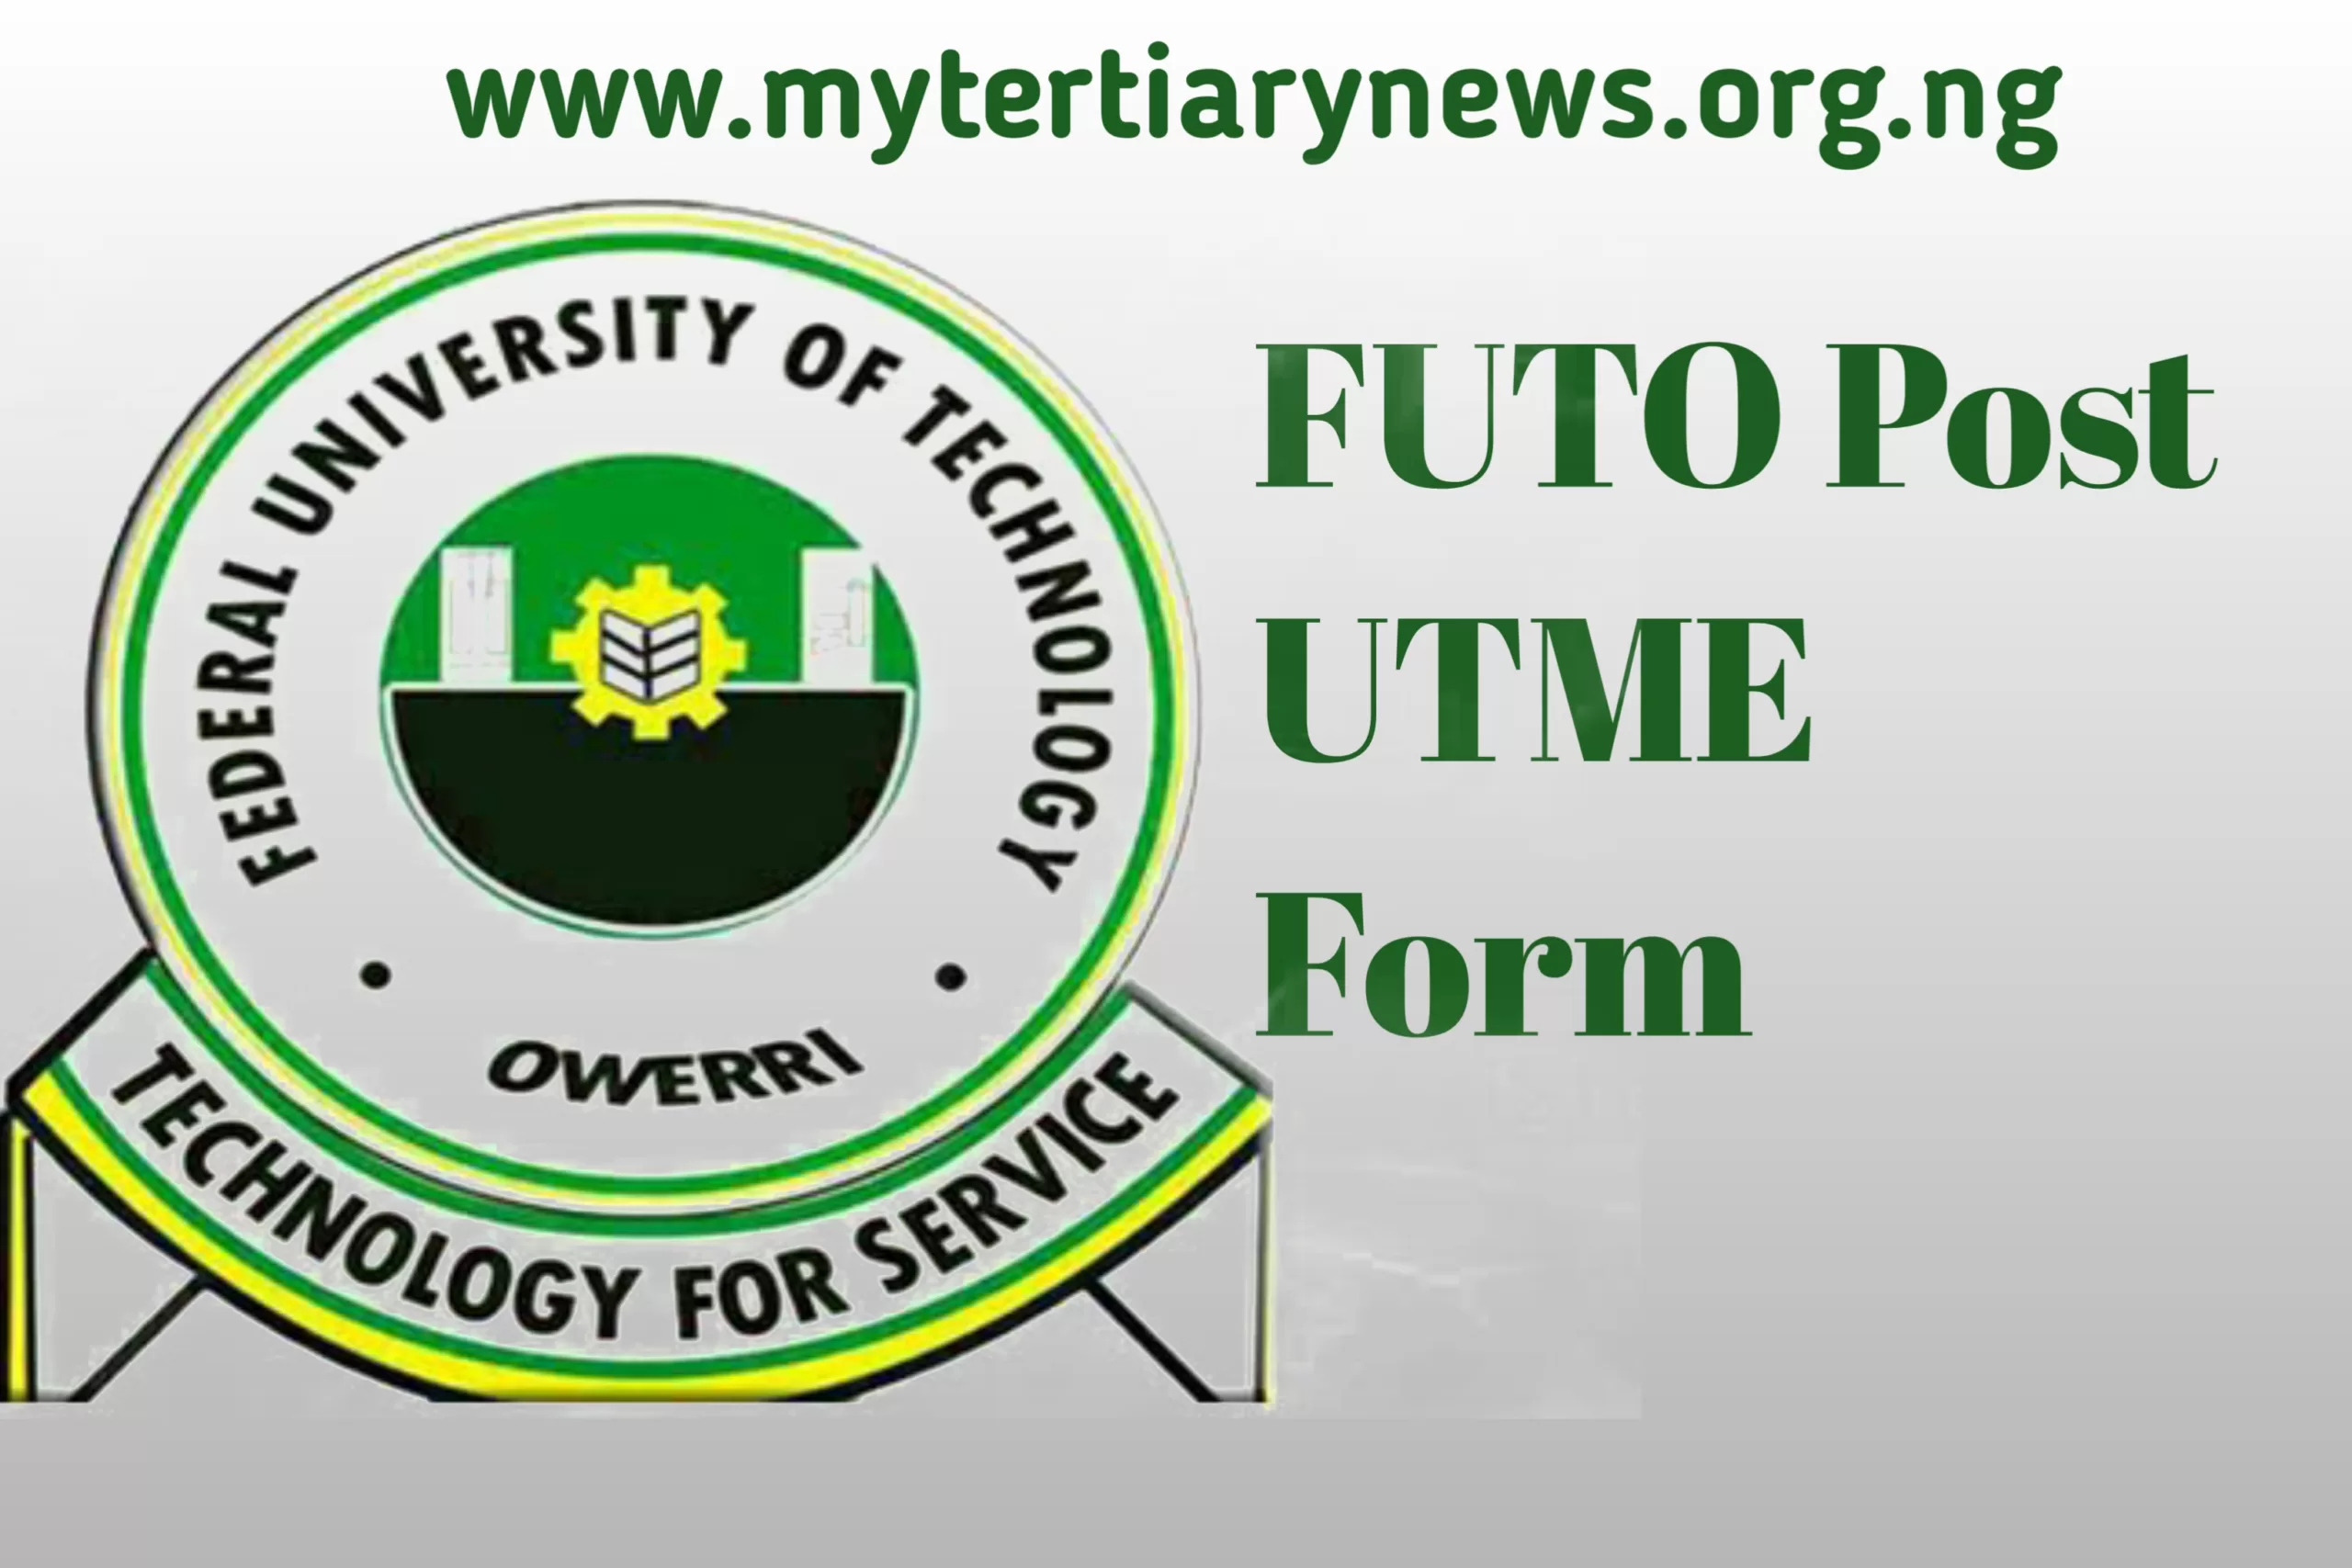 FUTO Image || Is FUTO Post UTME Form Out